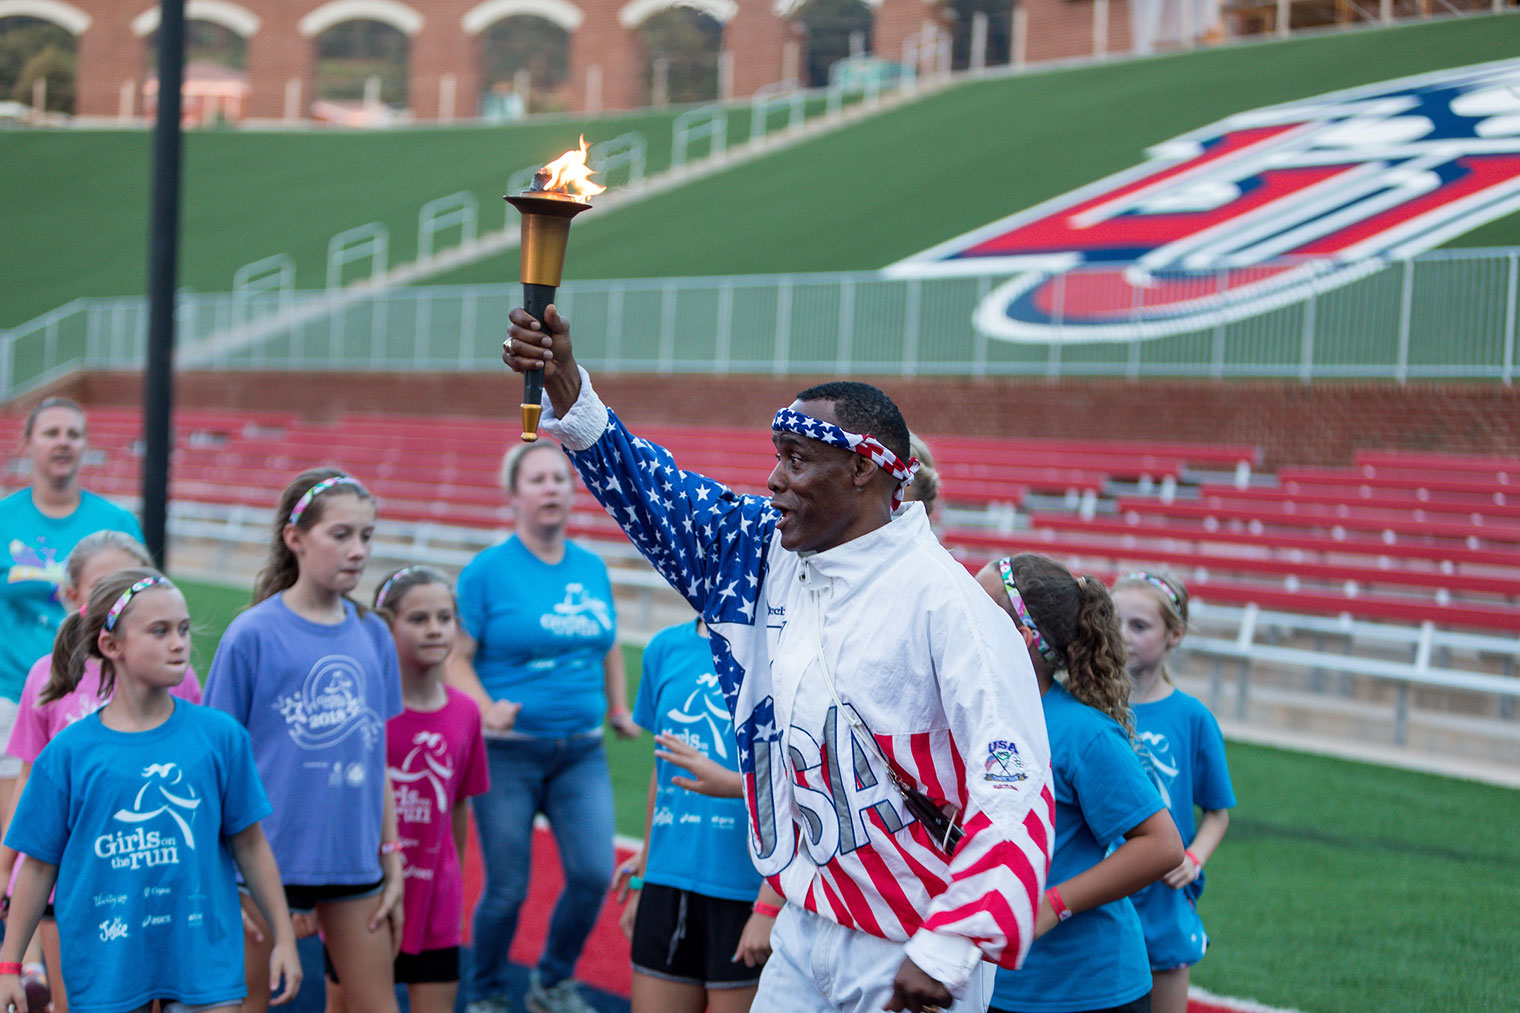 Anthony 'Buddy' Lee, who competed in the 1992 Summer Olympics in Barcelona and was a torch bearer for the 1996 Summer Games in Atlanta, receives the torch relayed into Williams Stadium by Girls On The Run on Friday night. 